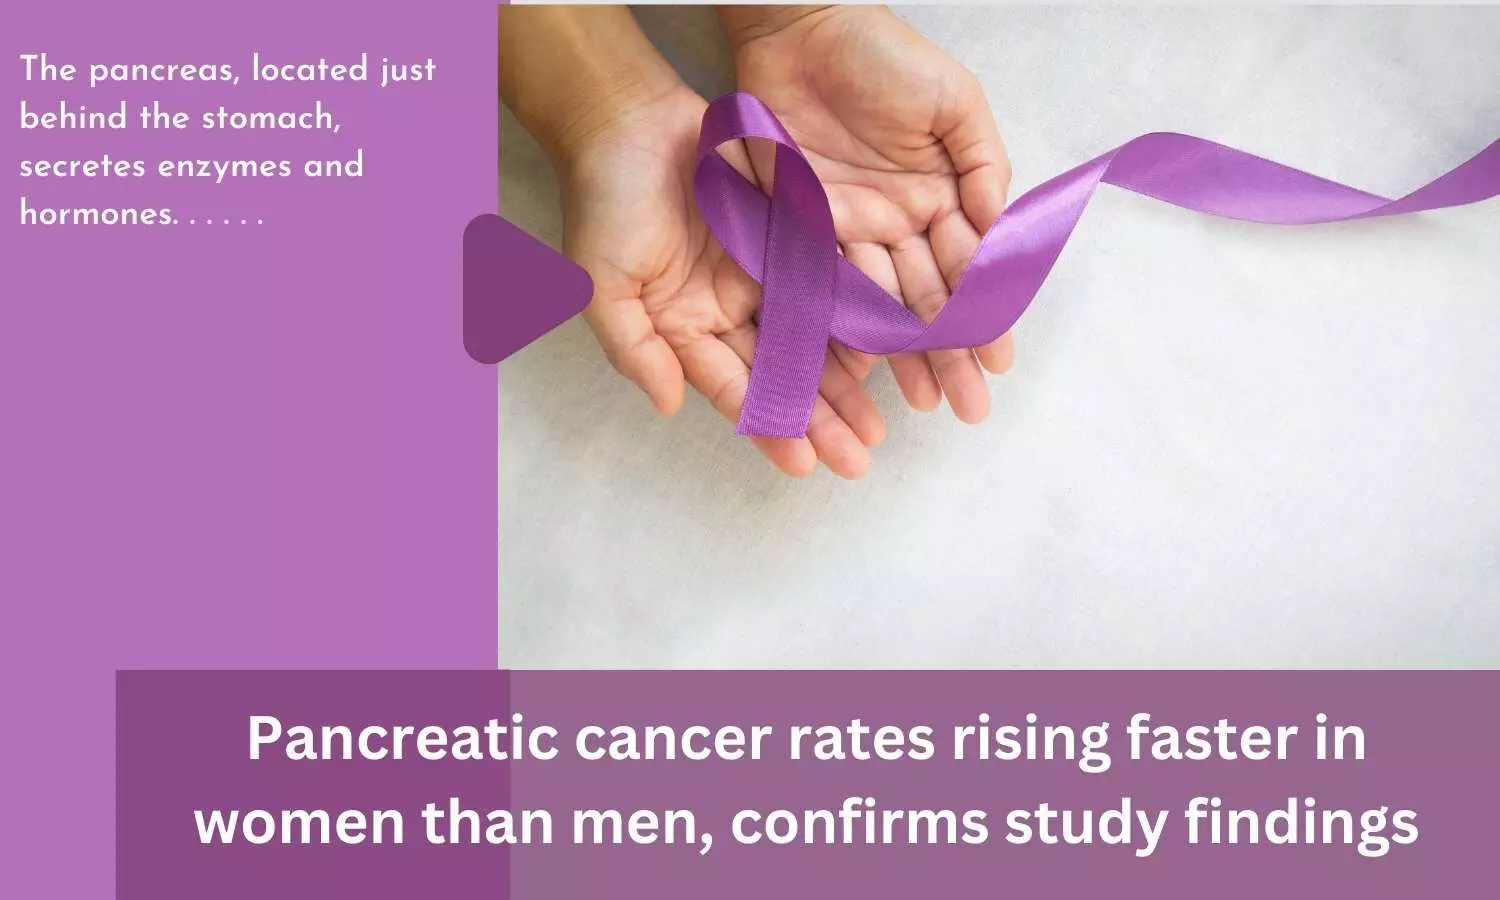 Pancreatic cancer rates rising faster in women than men, confirms study findings